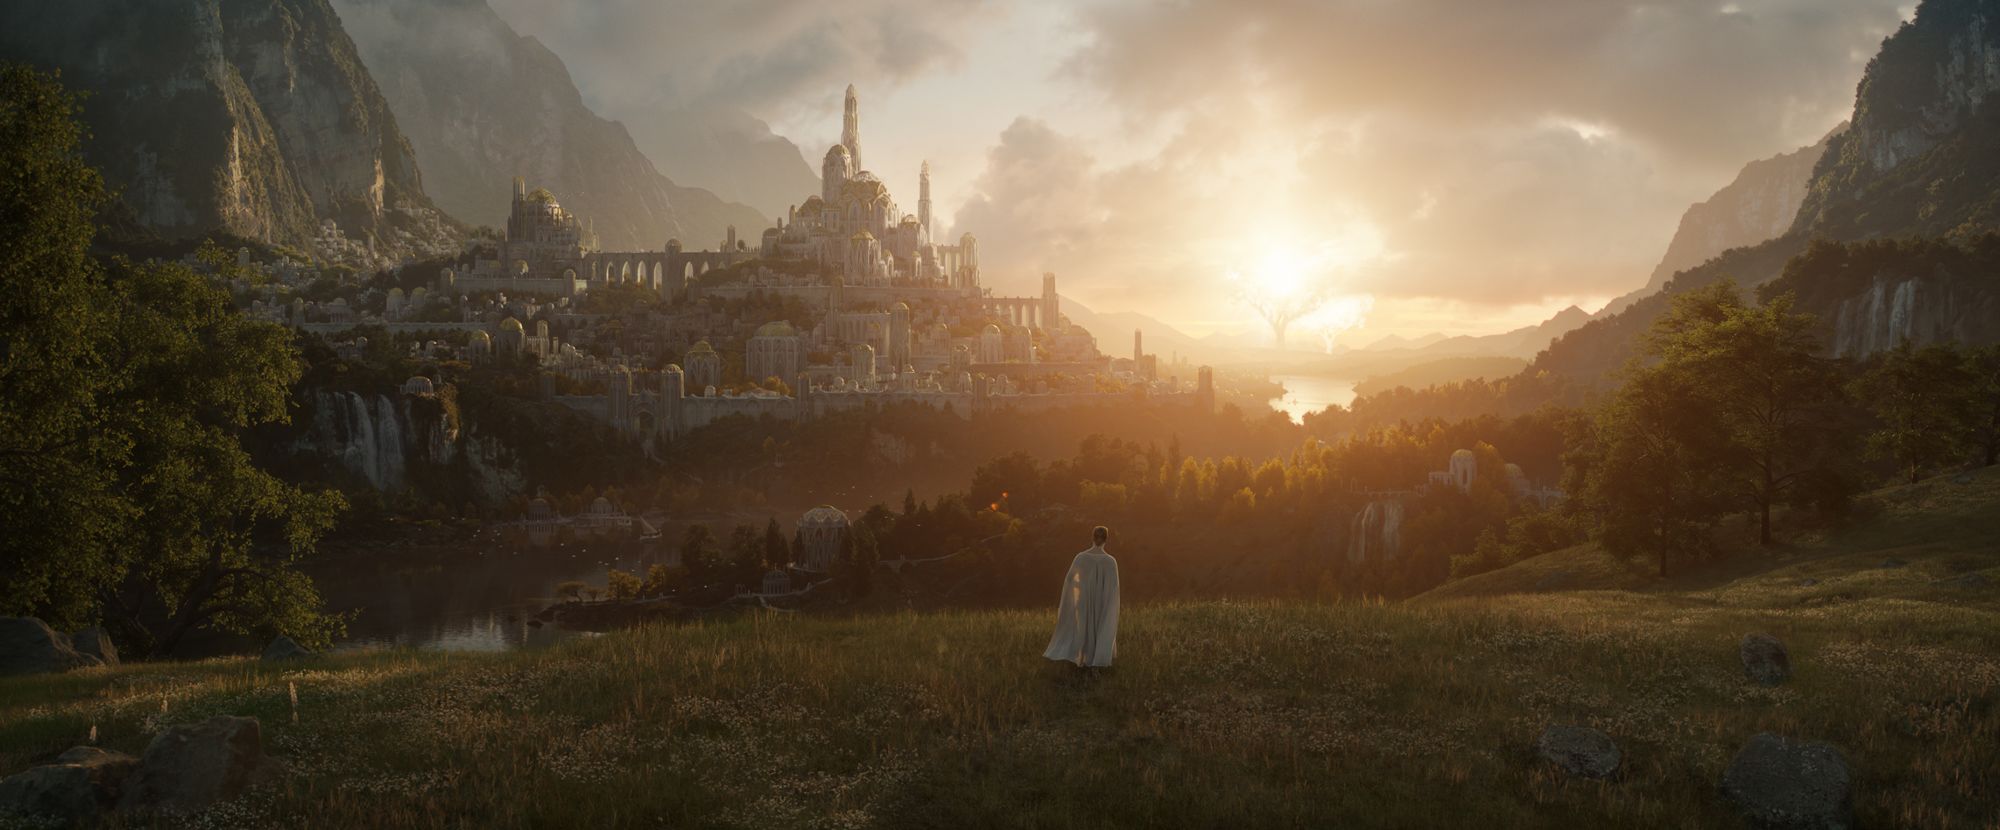 Lord of the Rings: Rings of Power' Trailer: Galadriel and Harfoots